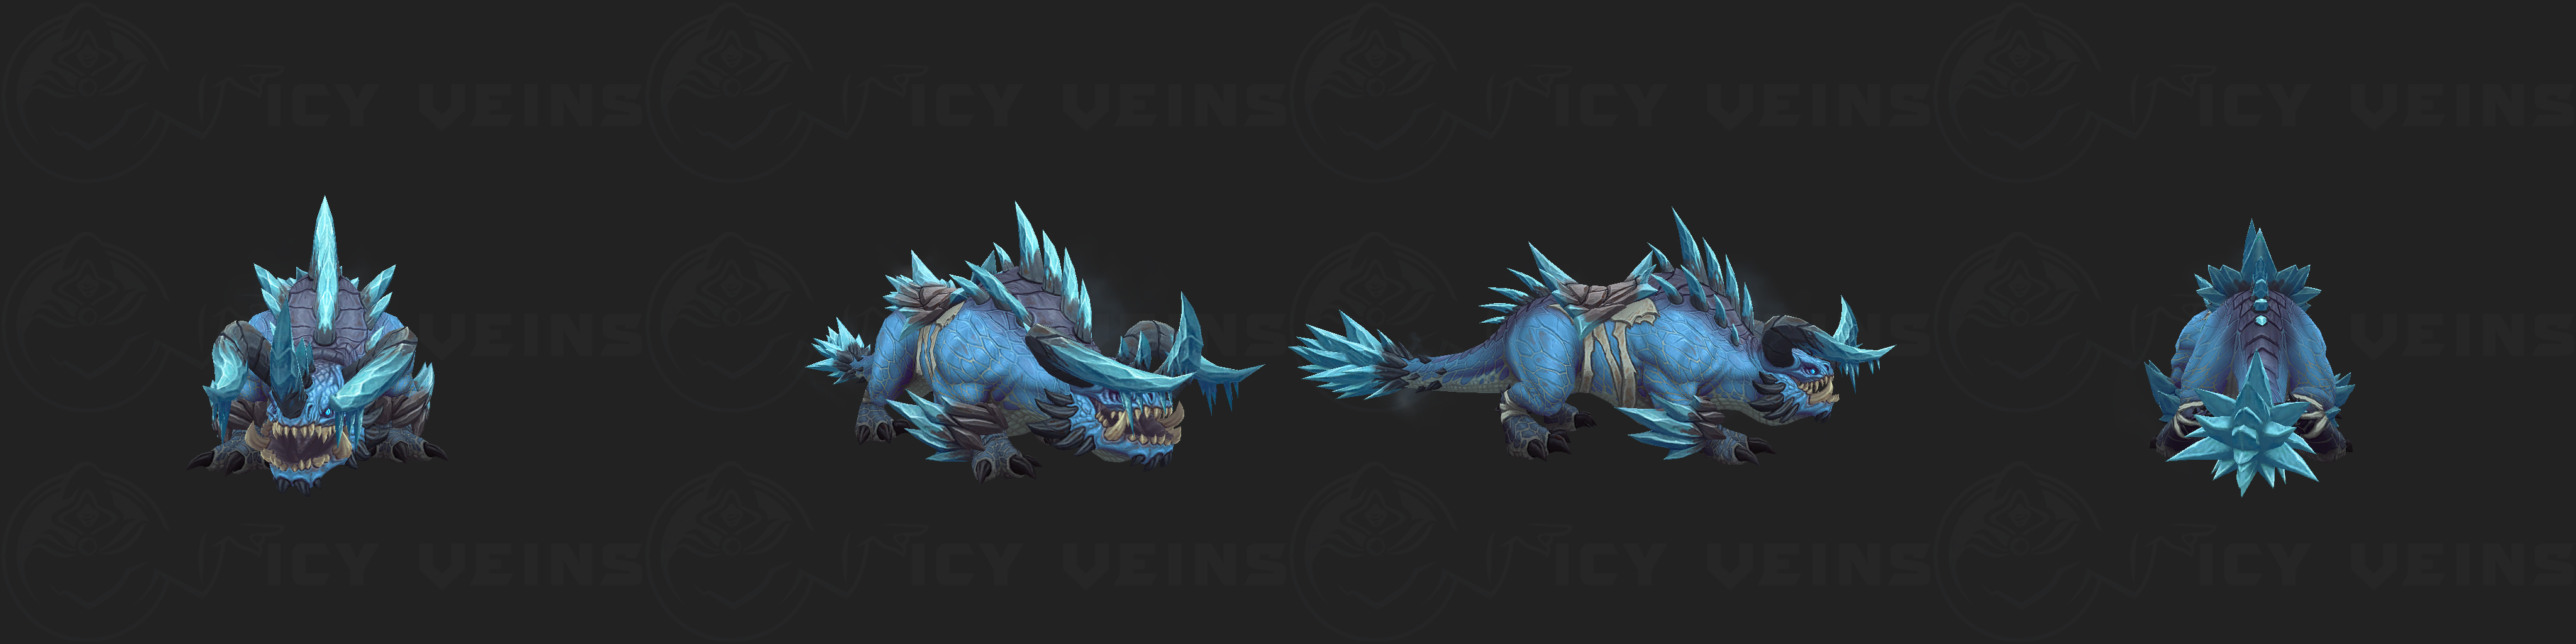 https://static.icy-veins.com/images/wow/dragonflight/hailstorm-armoredon.jpg